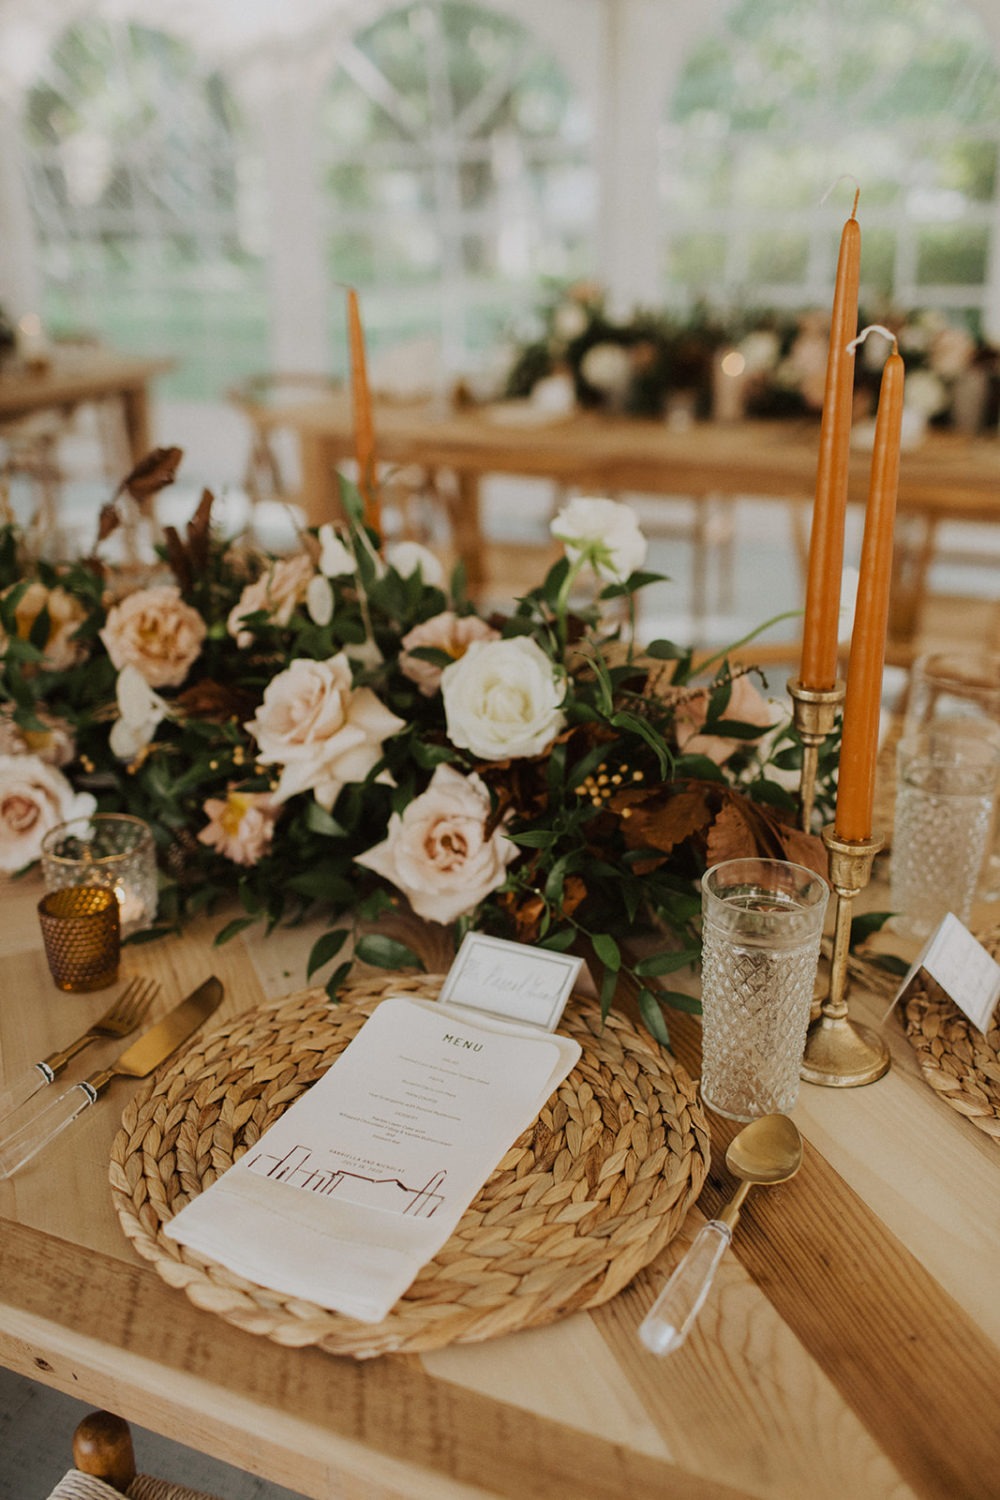 A menu, candles, and greenery decorate wedding reception table